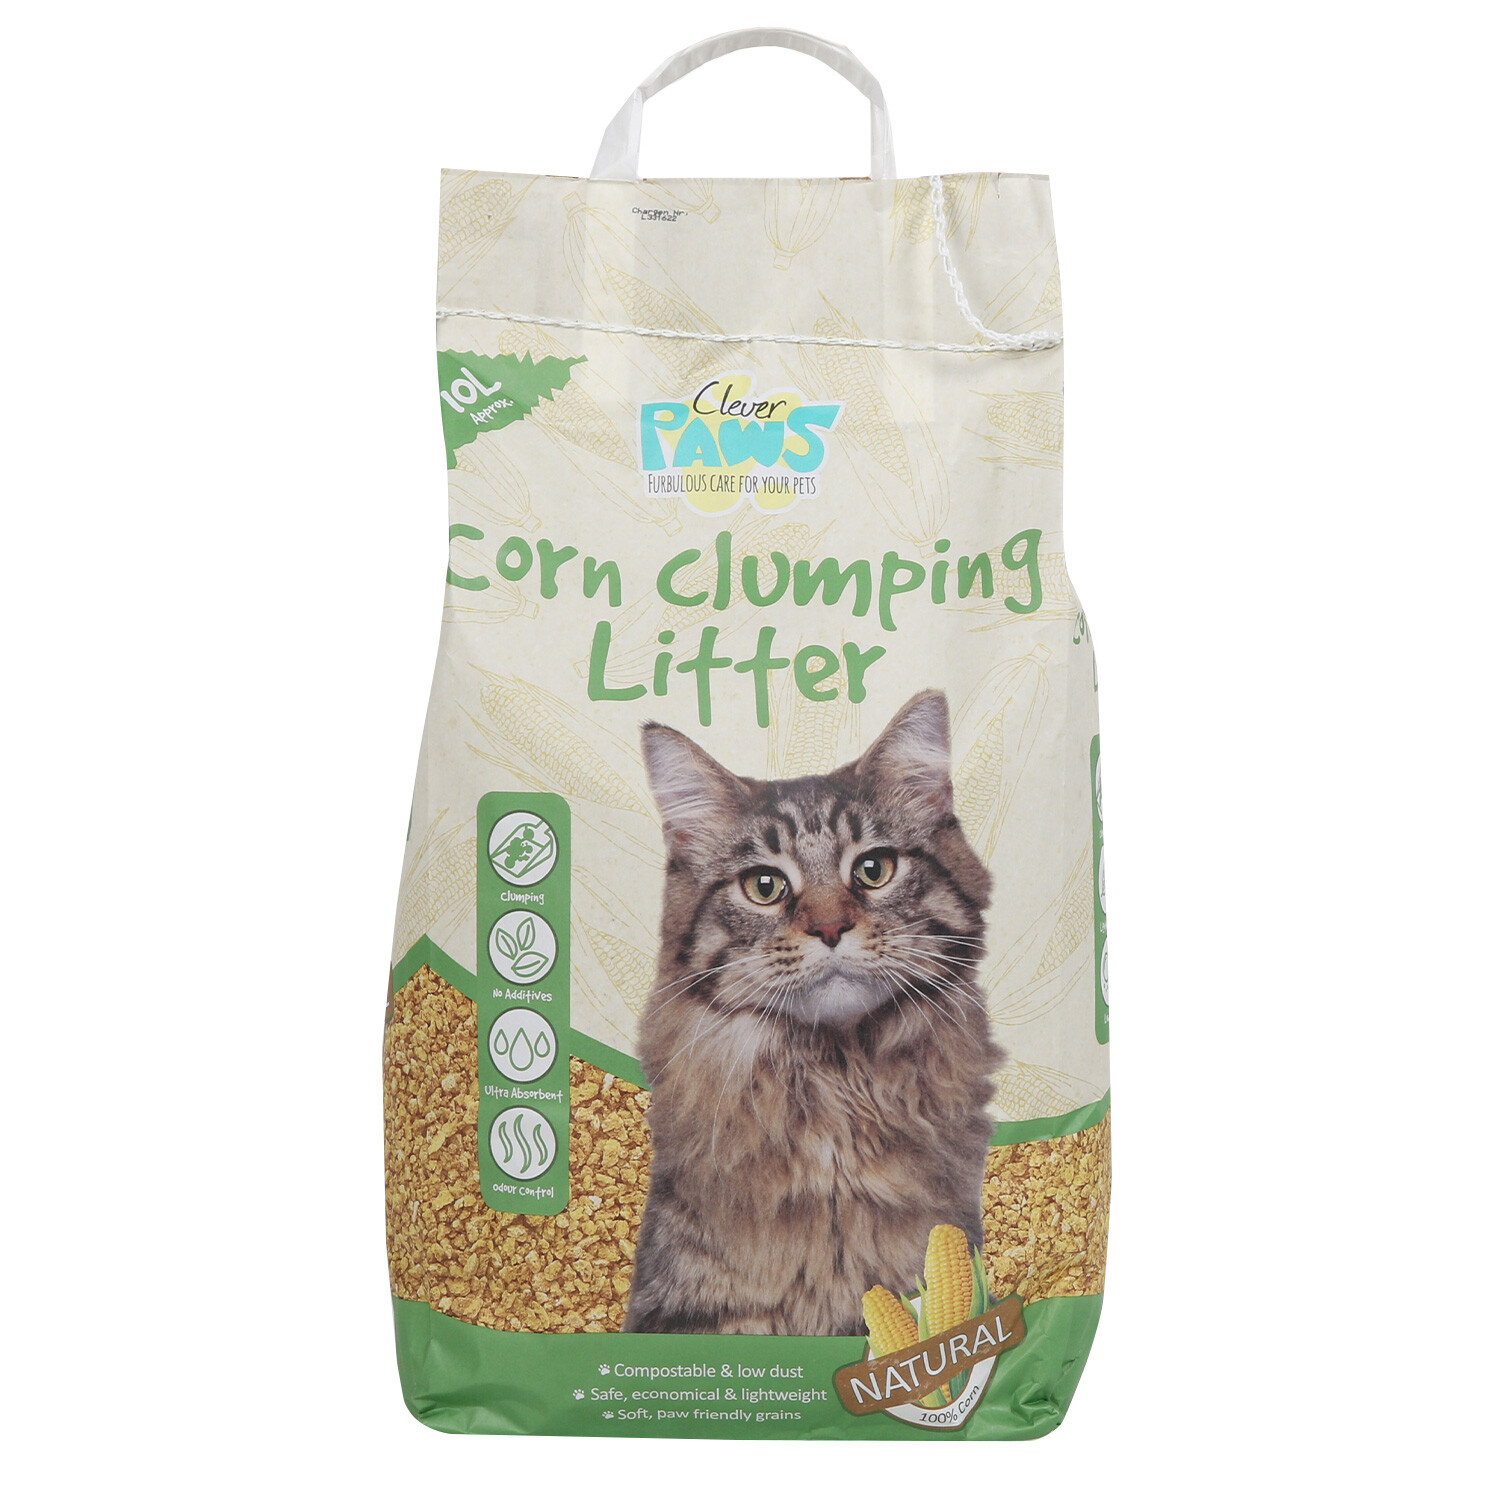 Clever Paws Corn Clumping Natural Cat Litter 10L Image